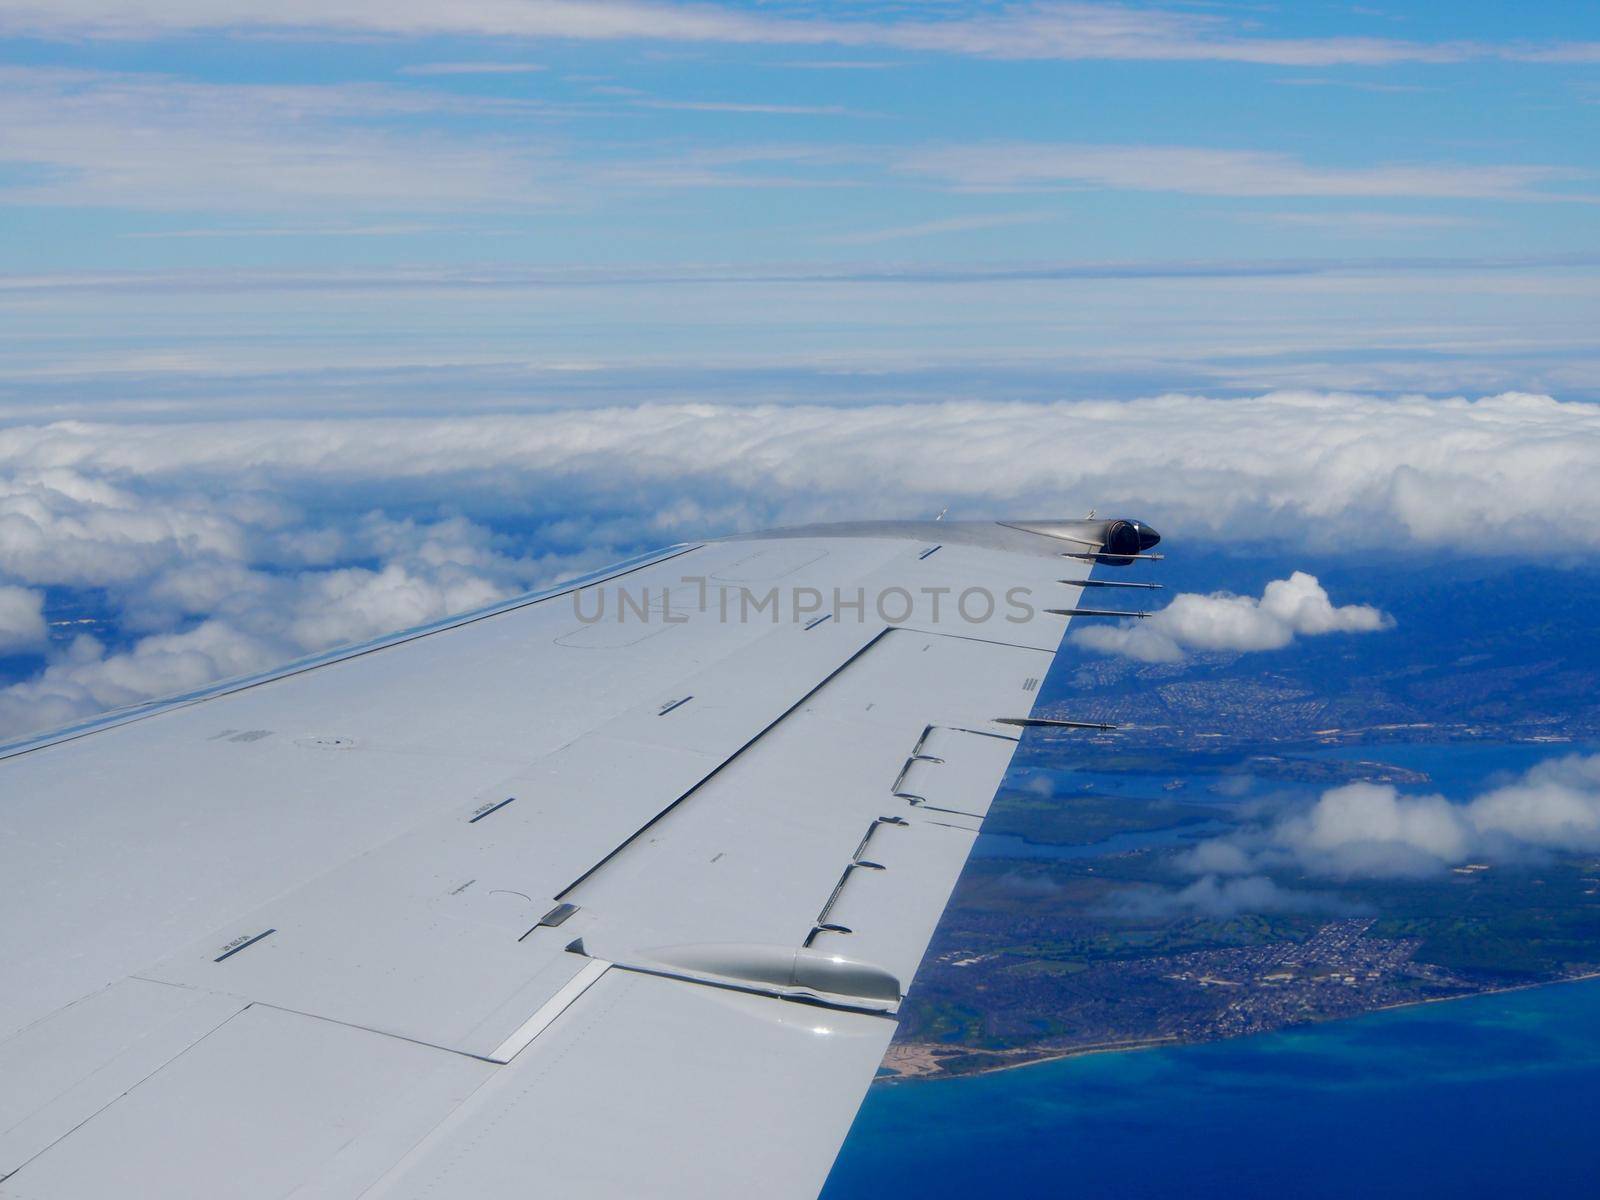 Aerial high in the sky shot of window view of plane leaving Honolulu, Hawaii with the wing of a commercial jet plane with Pearl Harbor, Coast, and clouds of Oahu visible.